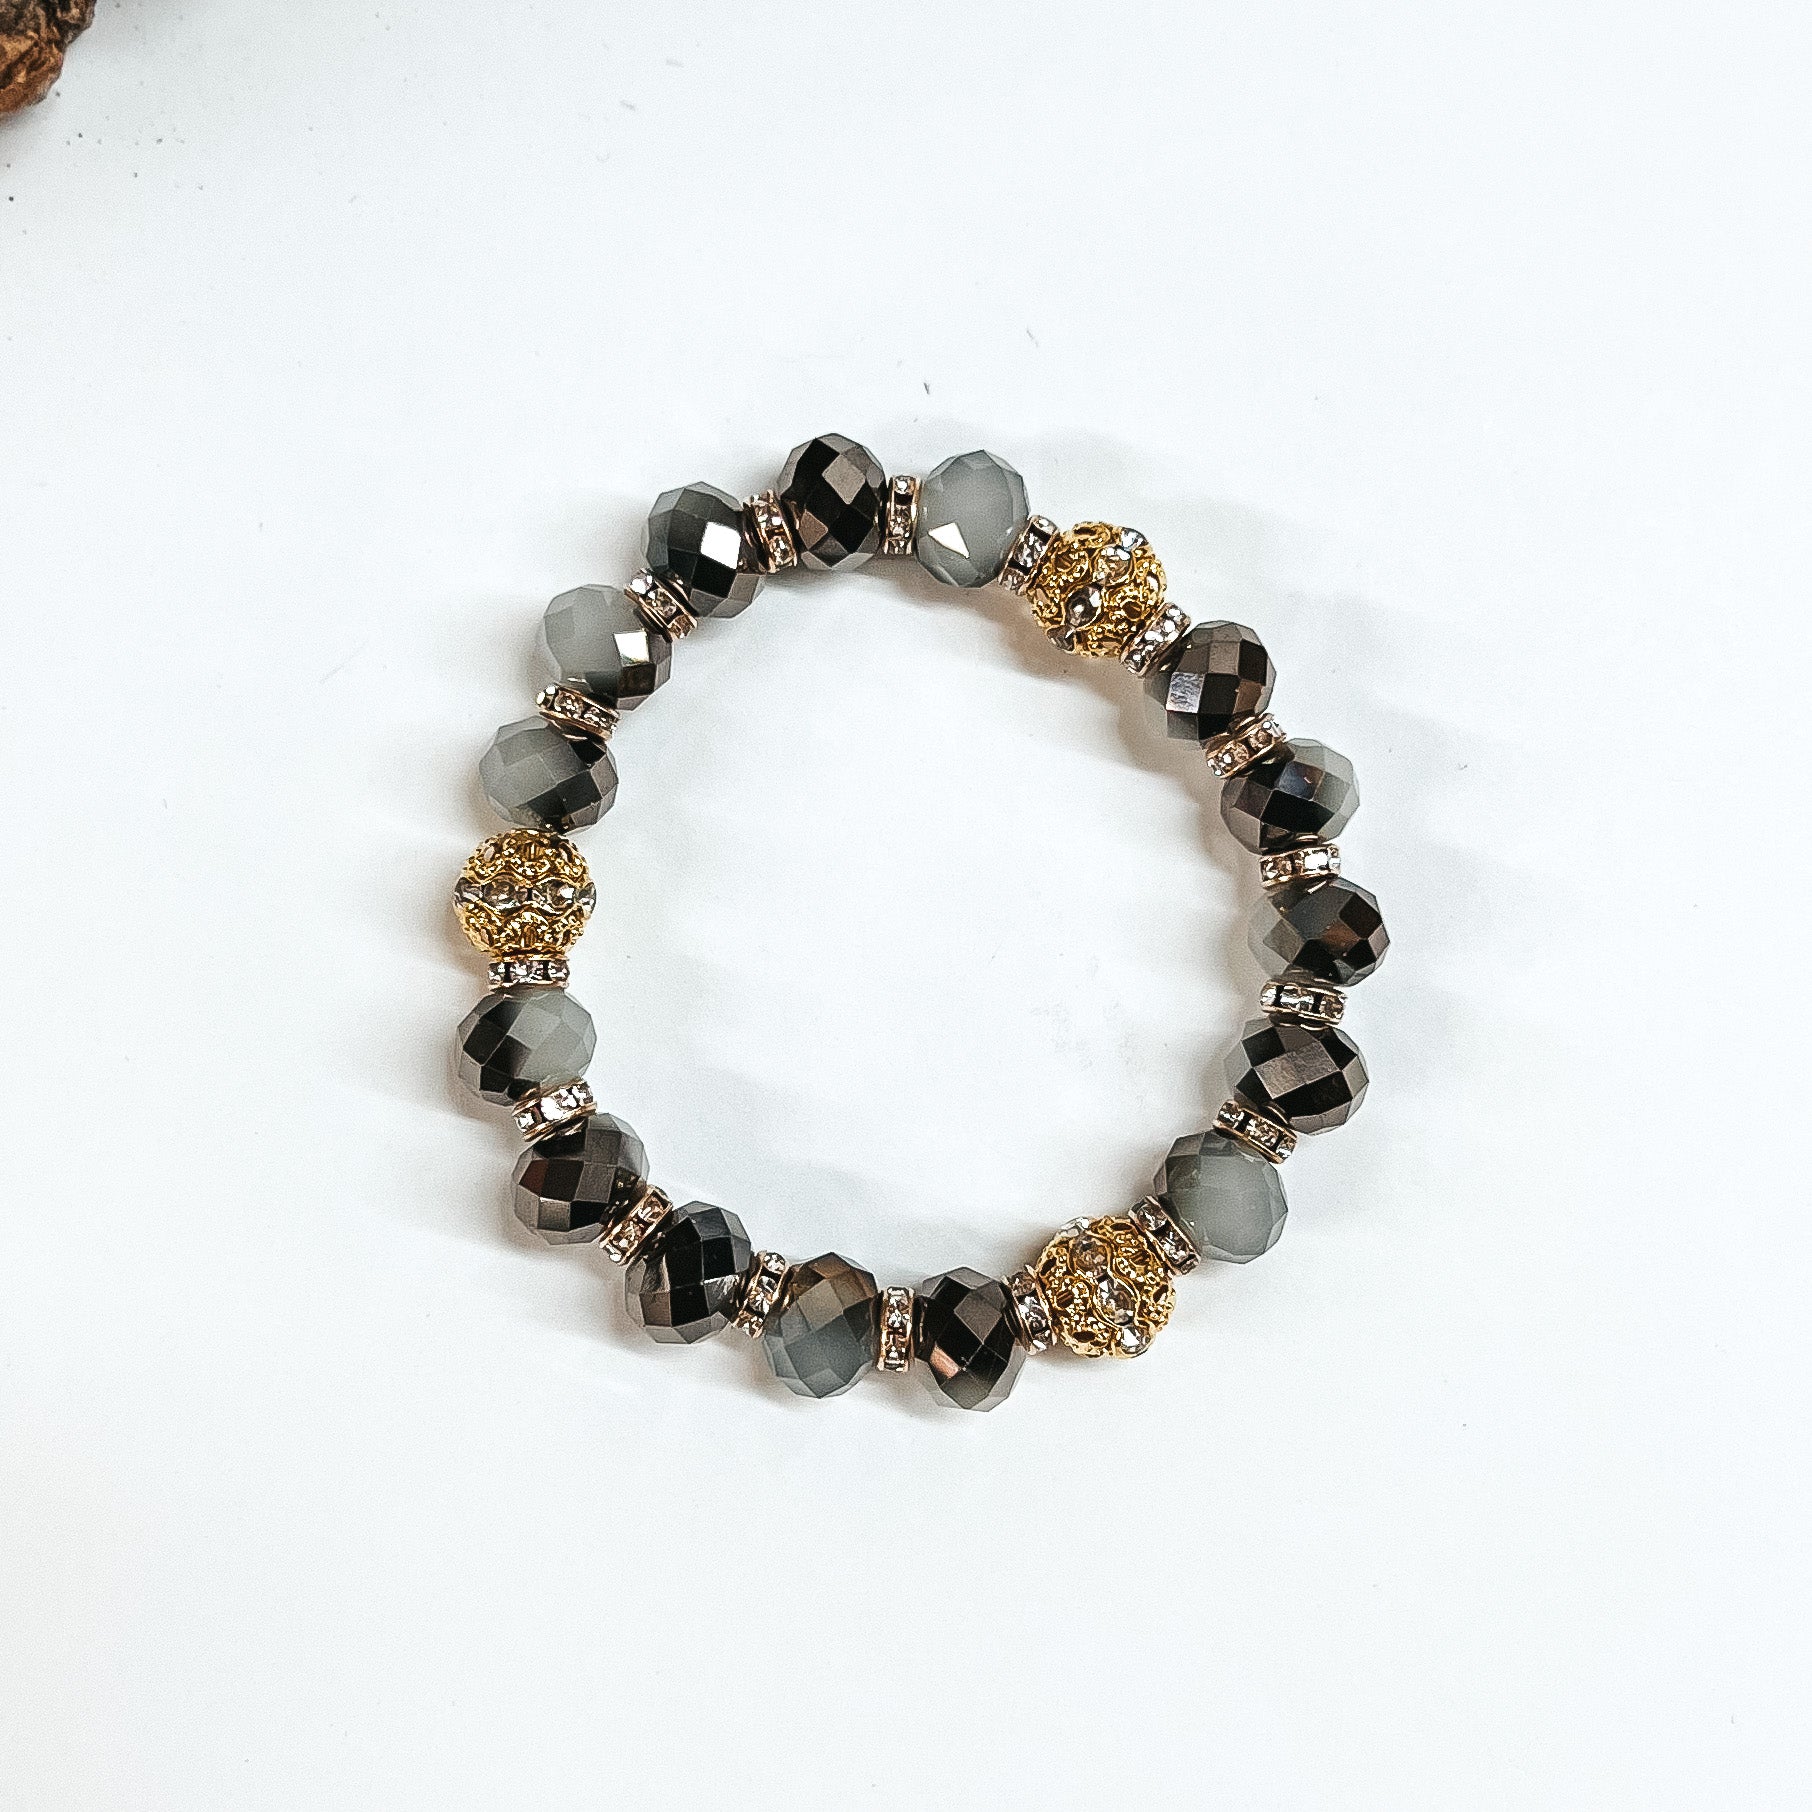 This is black mix crystal beaded bracelets with gold spacers.  The gold spacers have clear crystals in them and there are three gold and  crystals beads.This bracelet is taken on white background.